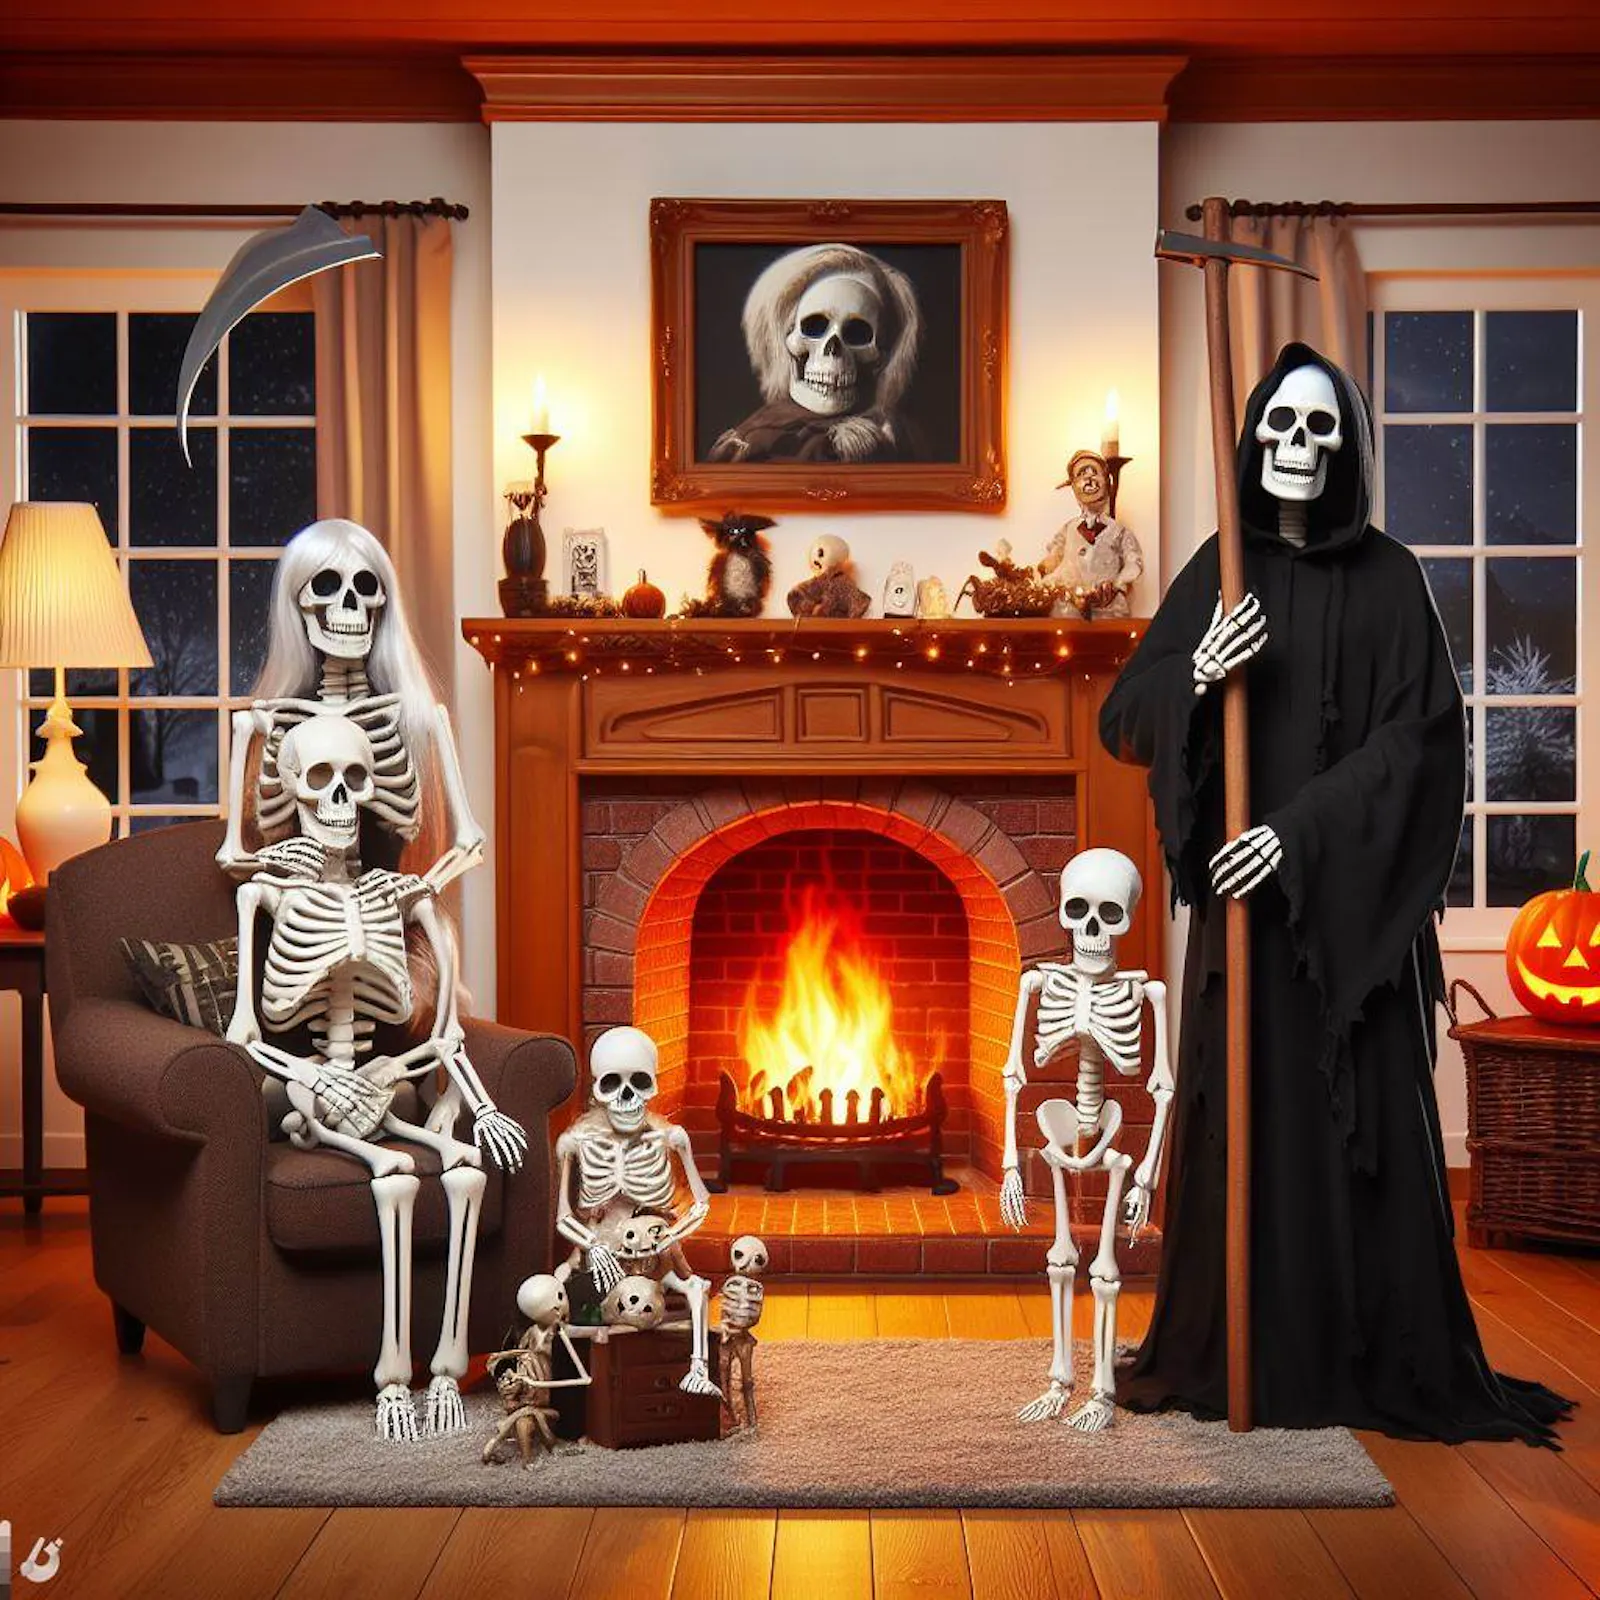 An image that show the grim reaper and five family skeletons standing in front of an open fire place.